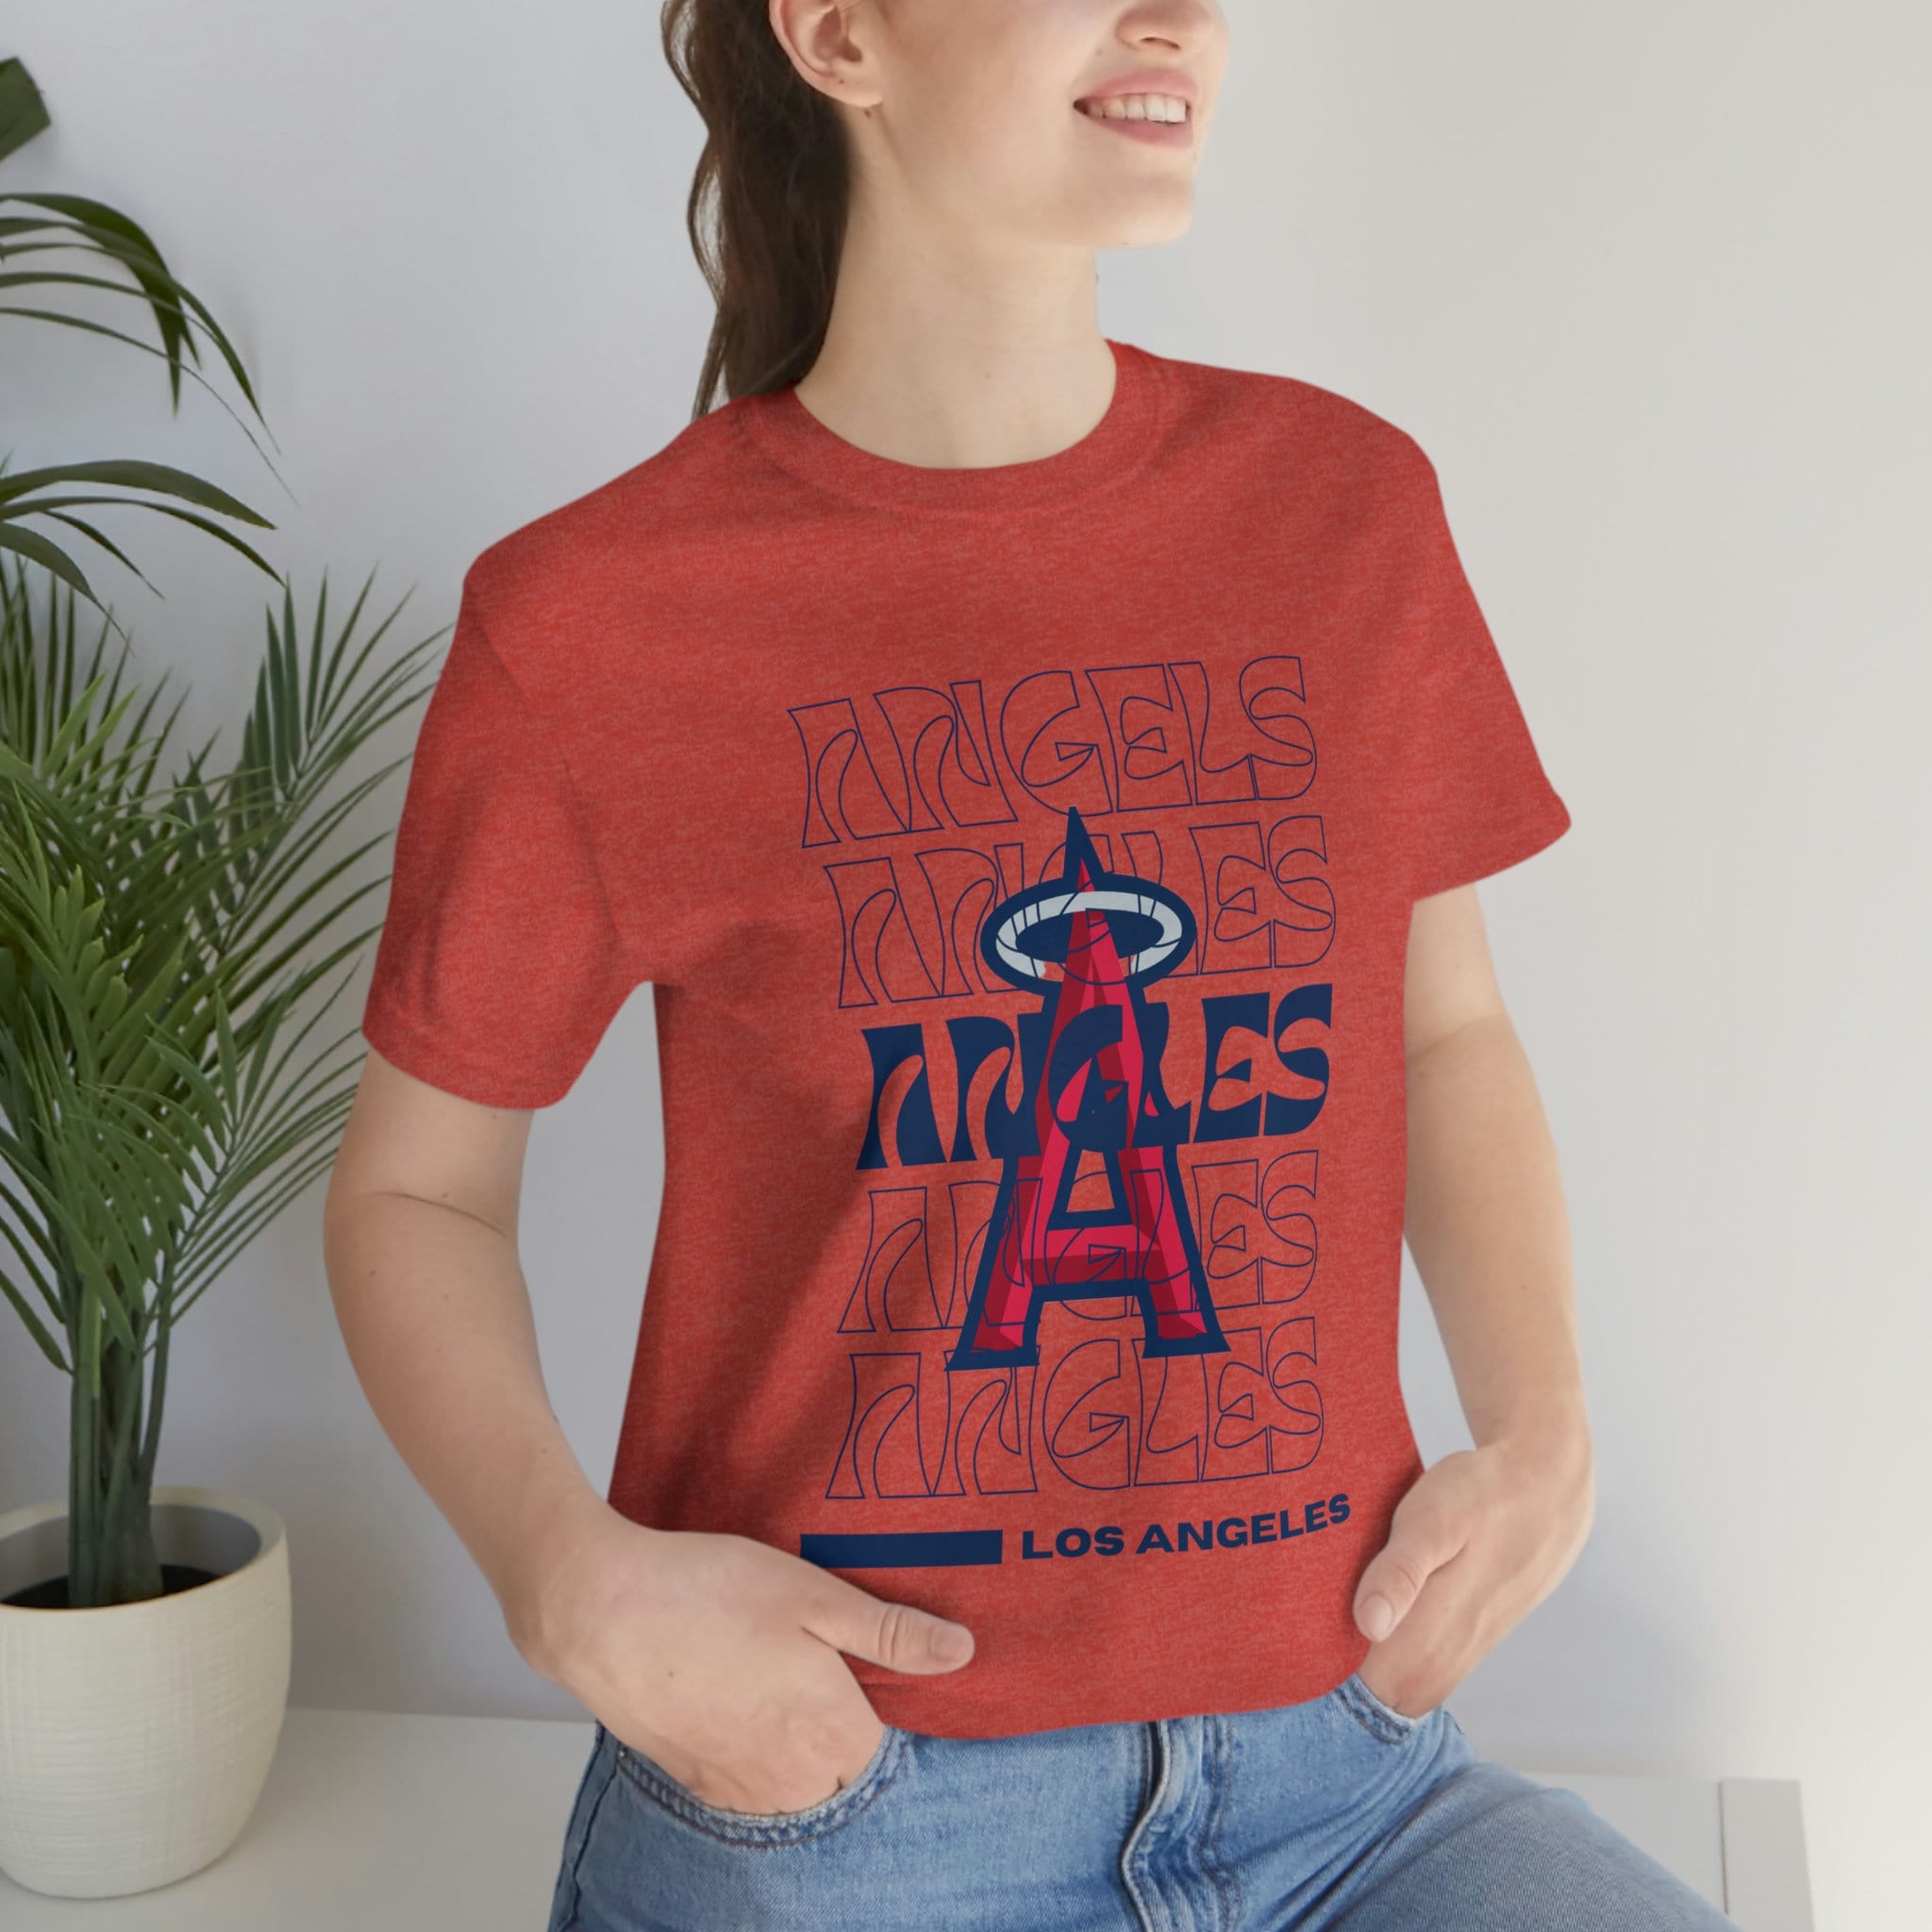 Buy Angels Mlb Shirt Online In India -  India